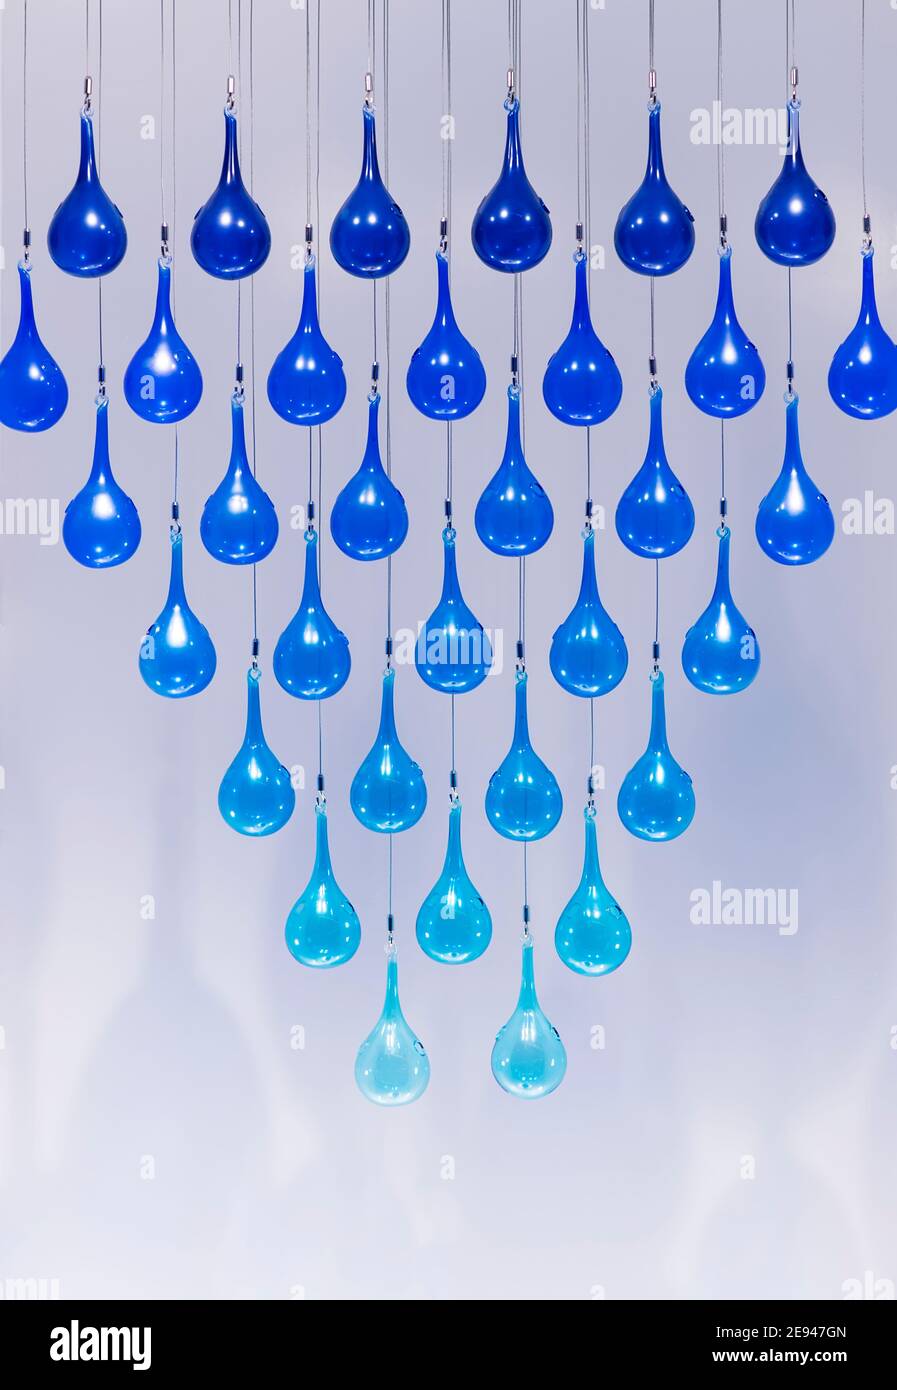 Blue glass bubble decoration tied rope hanging on ceiling Stock Photo